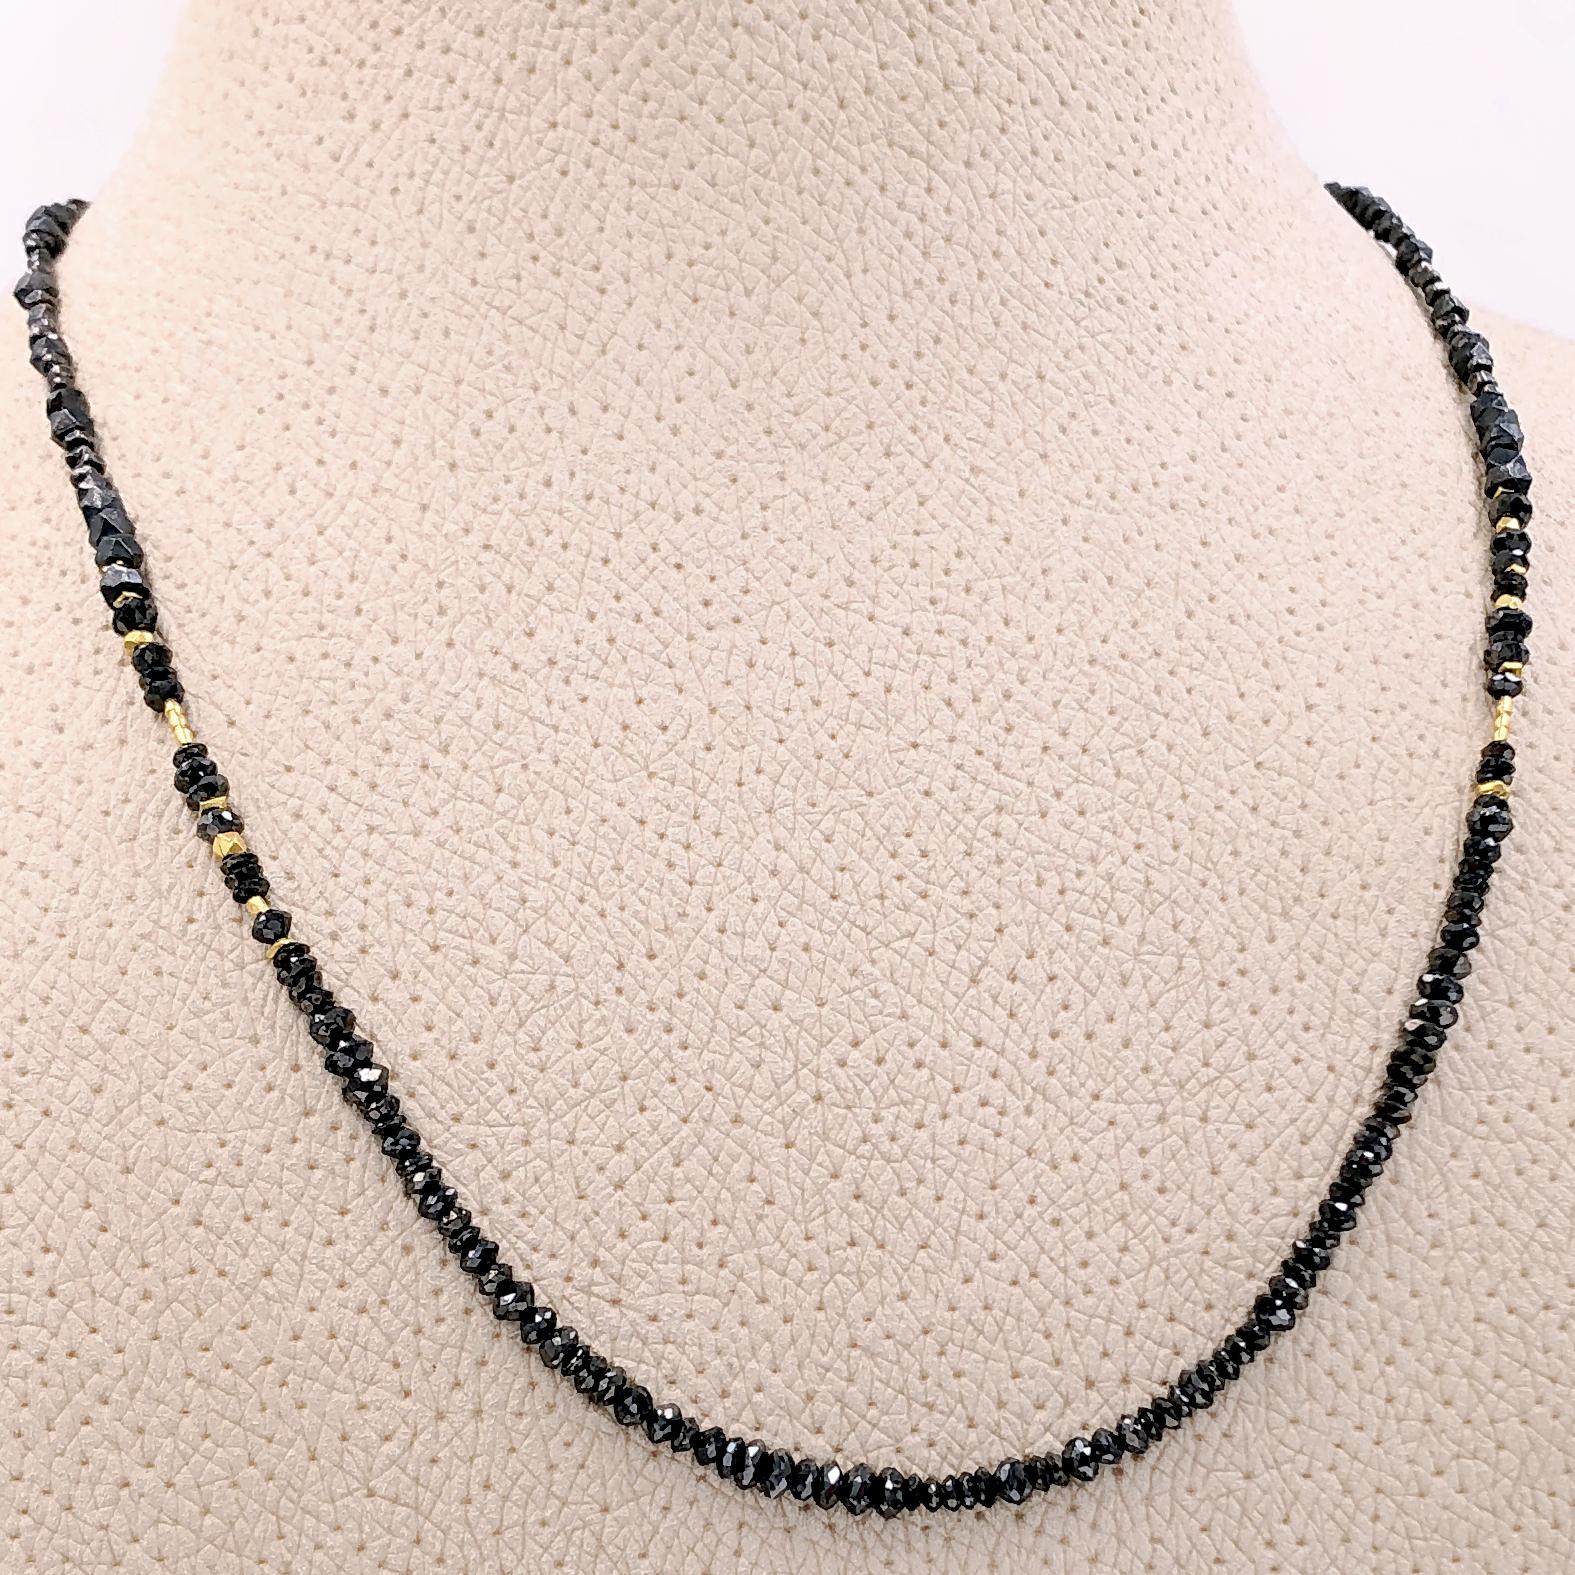 One of a Kind Necklace handcrafted by renowned jewelry artist Atelier Zobel (Peter Schmid) featuring 10.51 total carats of assorted faceted black diamonds, 24k gold Nepalese beads, and handmade faceted silver elements with a handmade oxidized silver